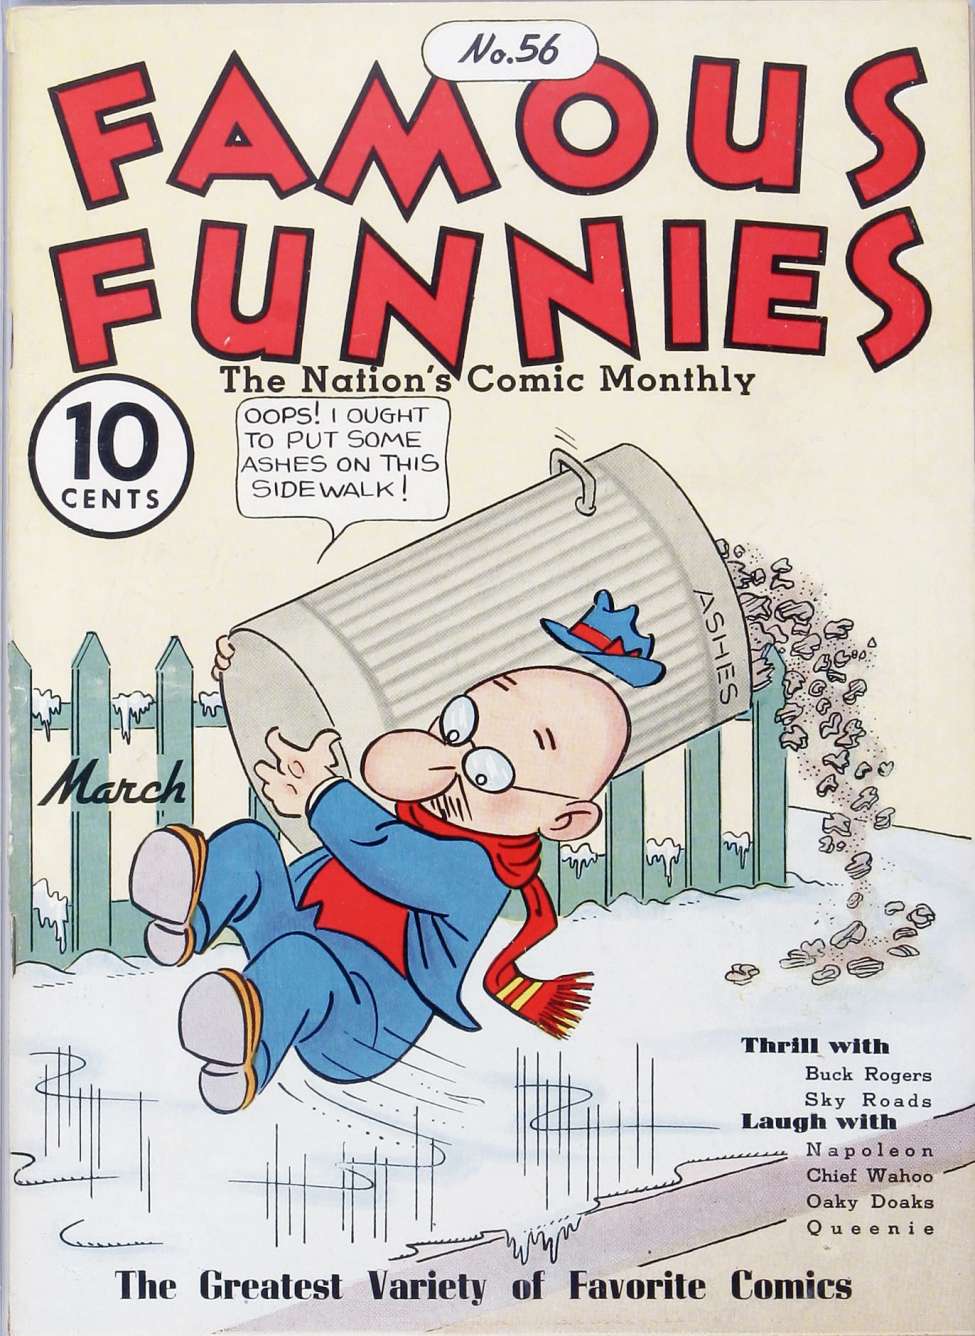 Book Cover For Famous Funnies 56